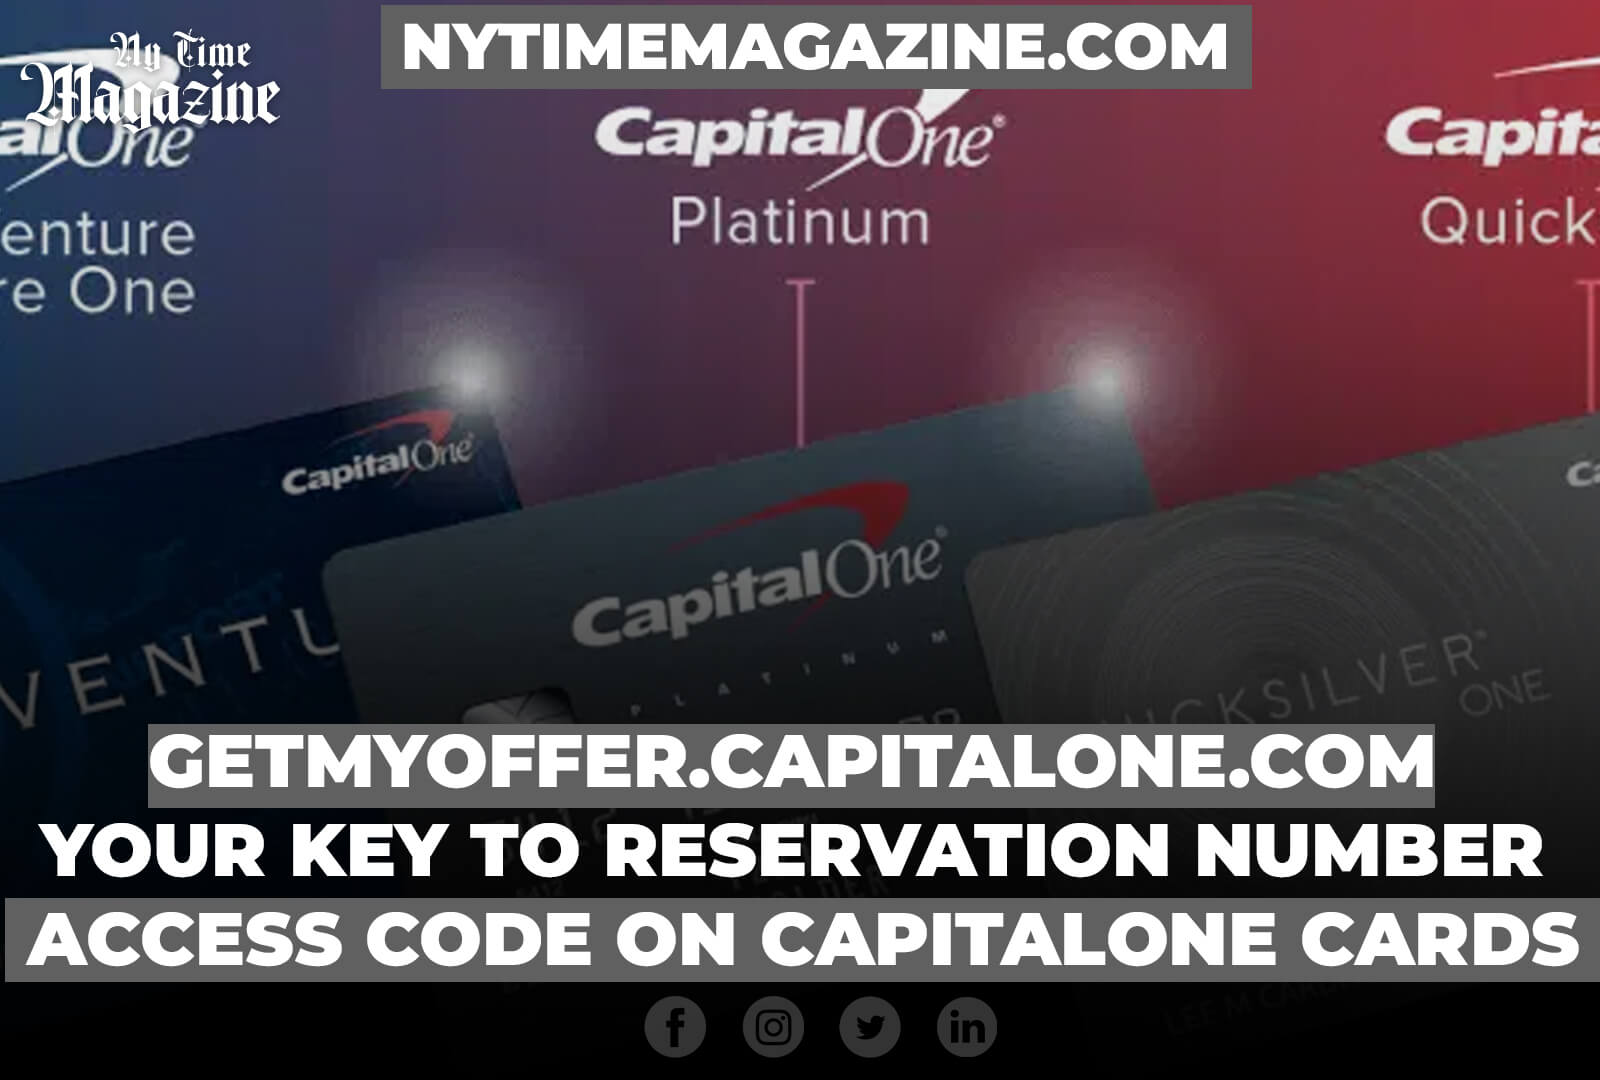 GETMYOFFER.CAPITALONE.COM: YOUR KEY TO RESERVATION NUMBER AND ACCESS CODE ON CAPITALONE CARDS